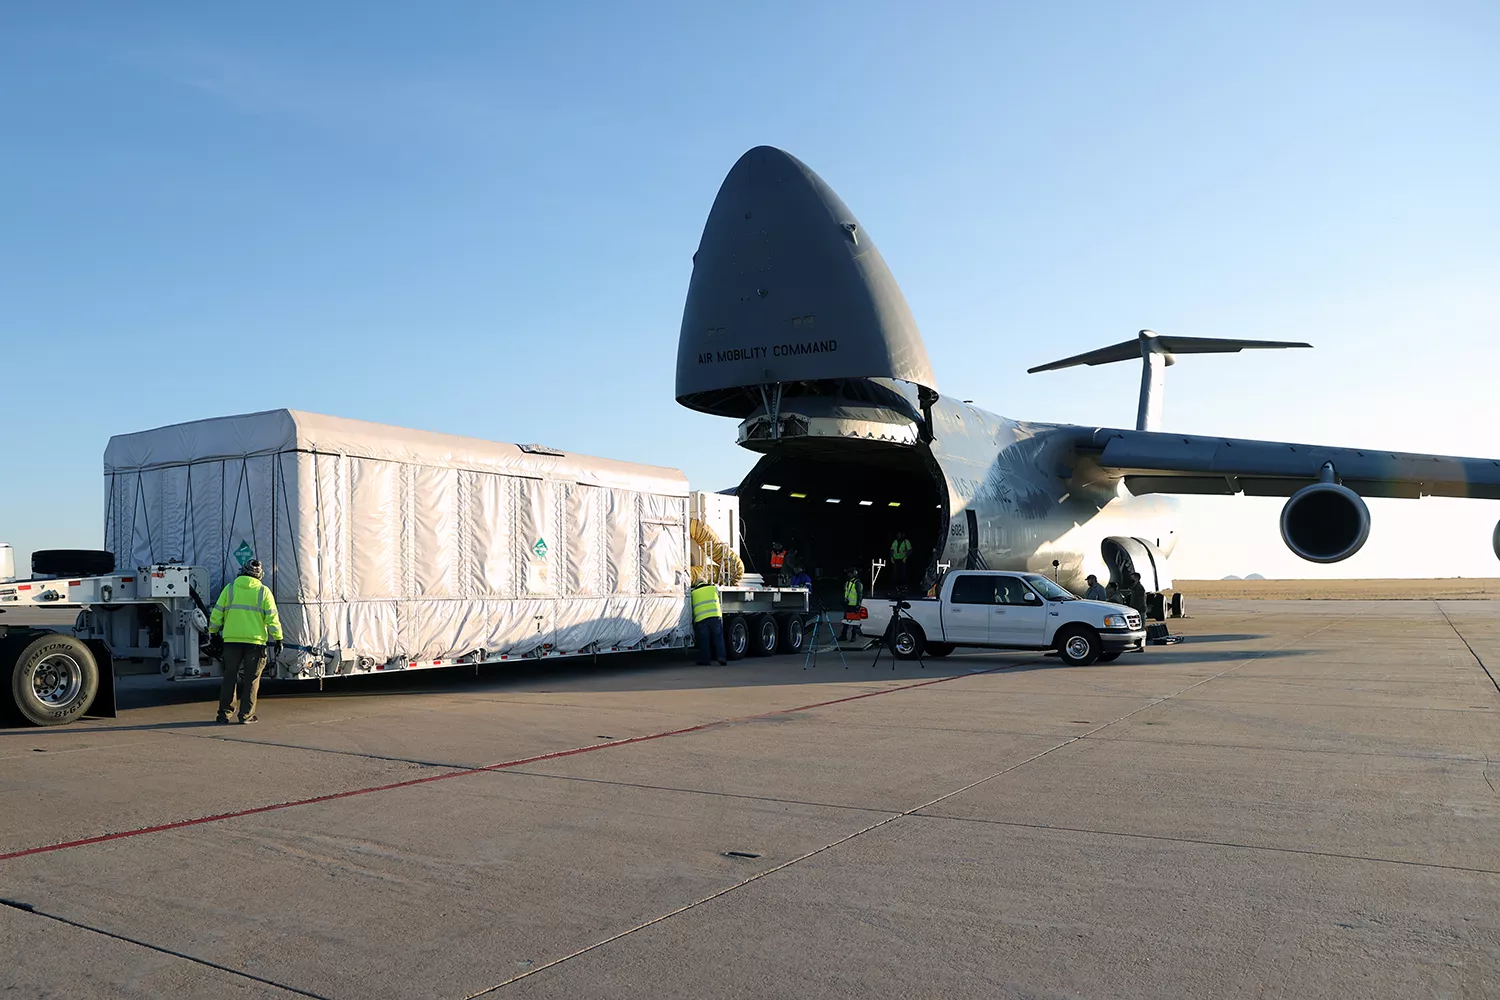 GOES-T being loaded onto a C-5M Super Galaxy aircraft that will fly it to the Kennedy Space Center in Florida.